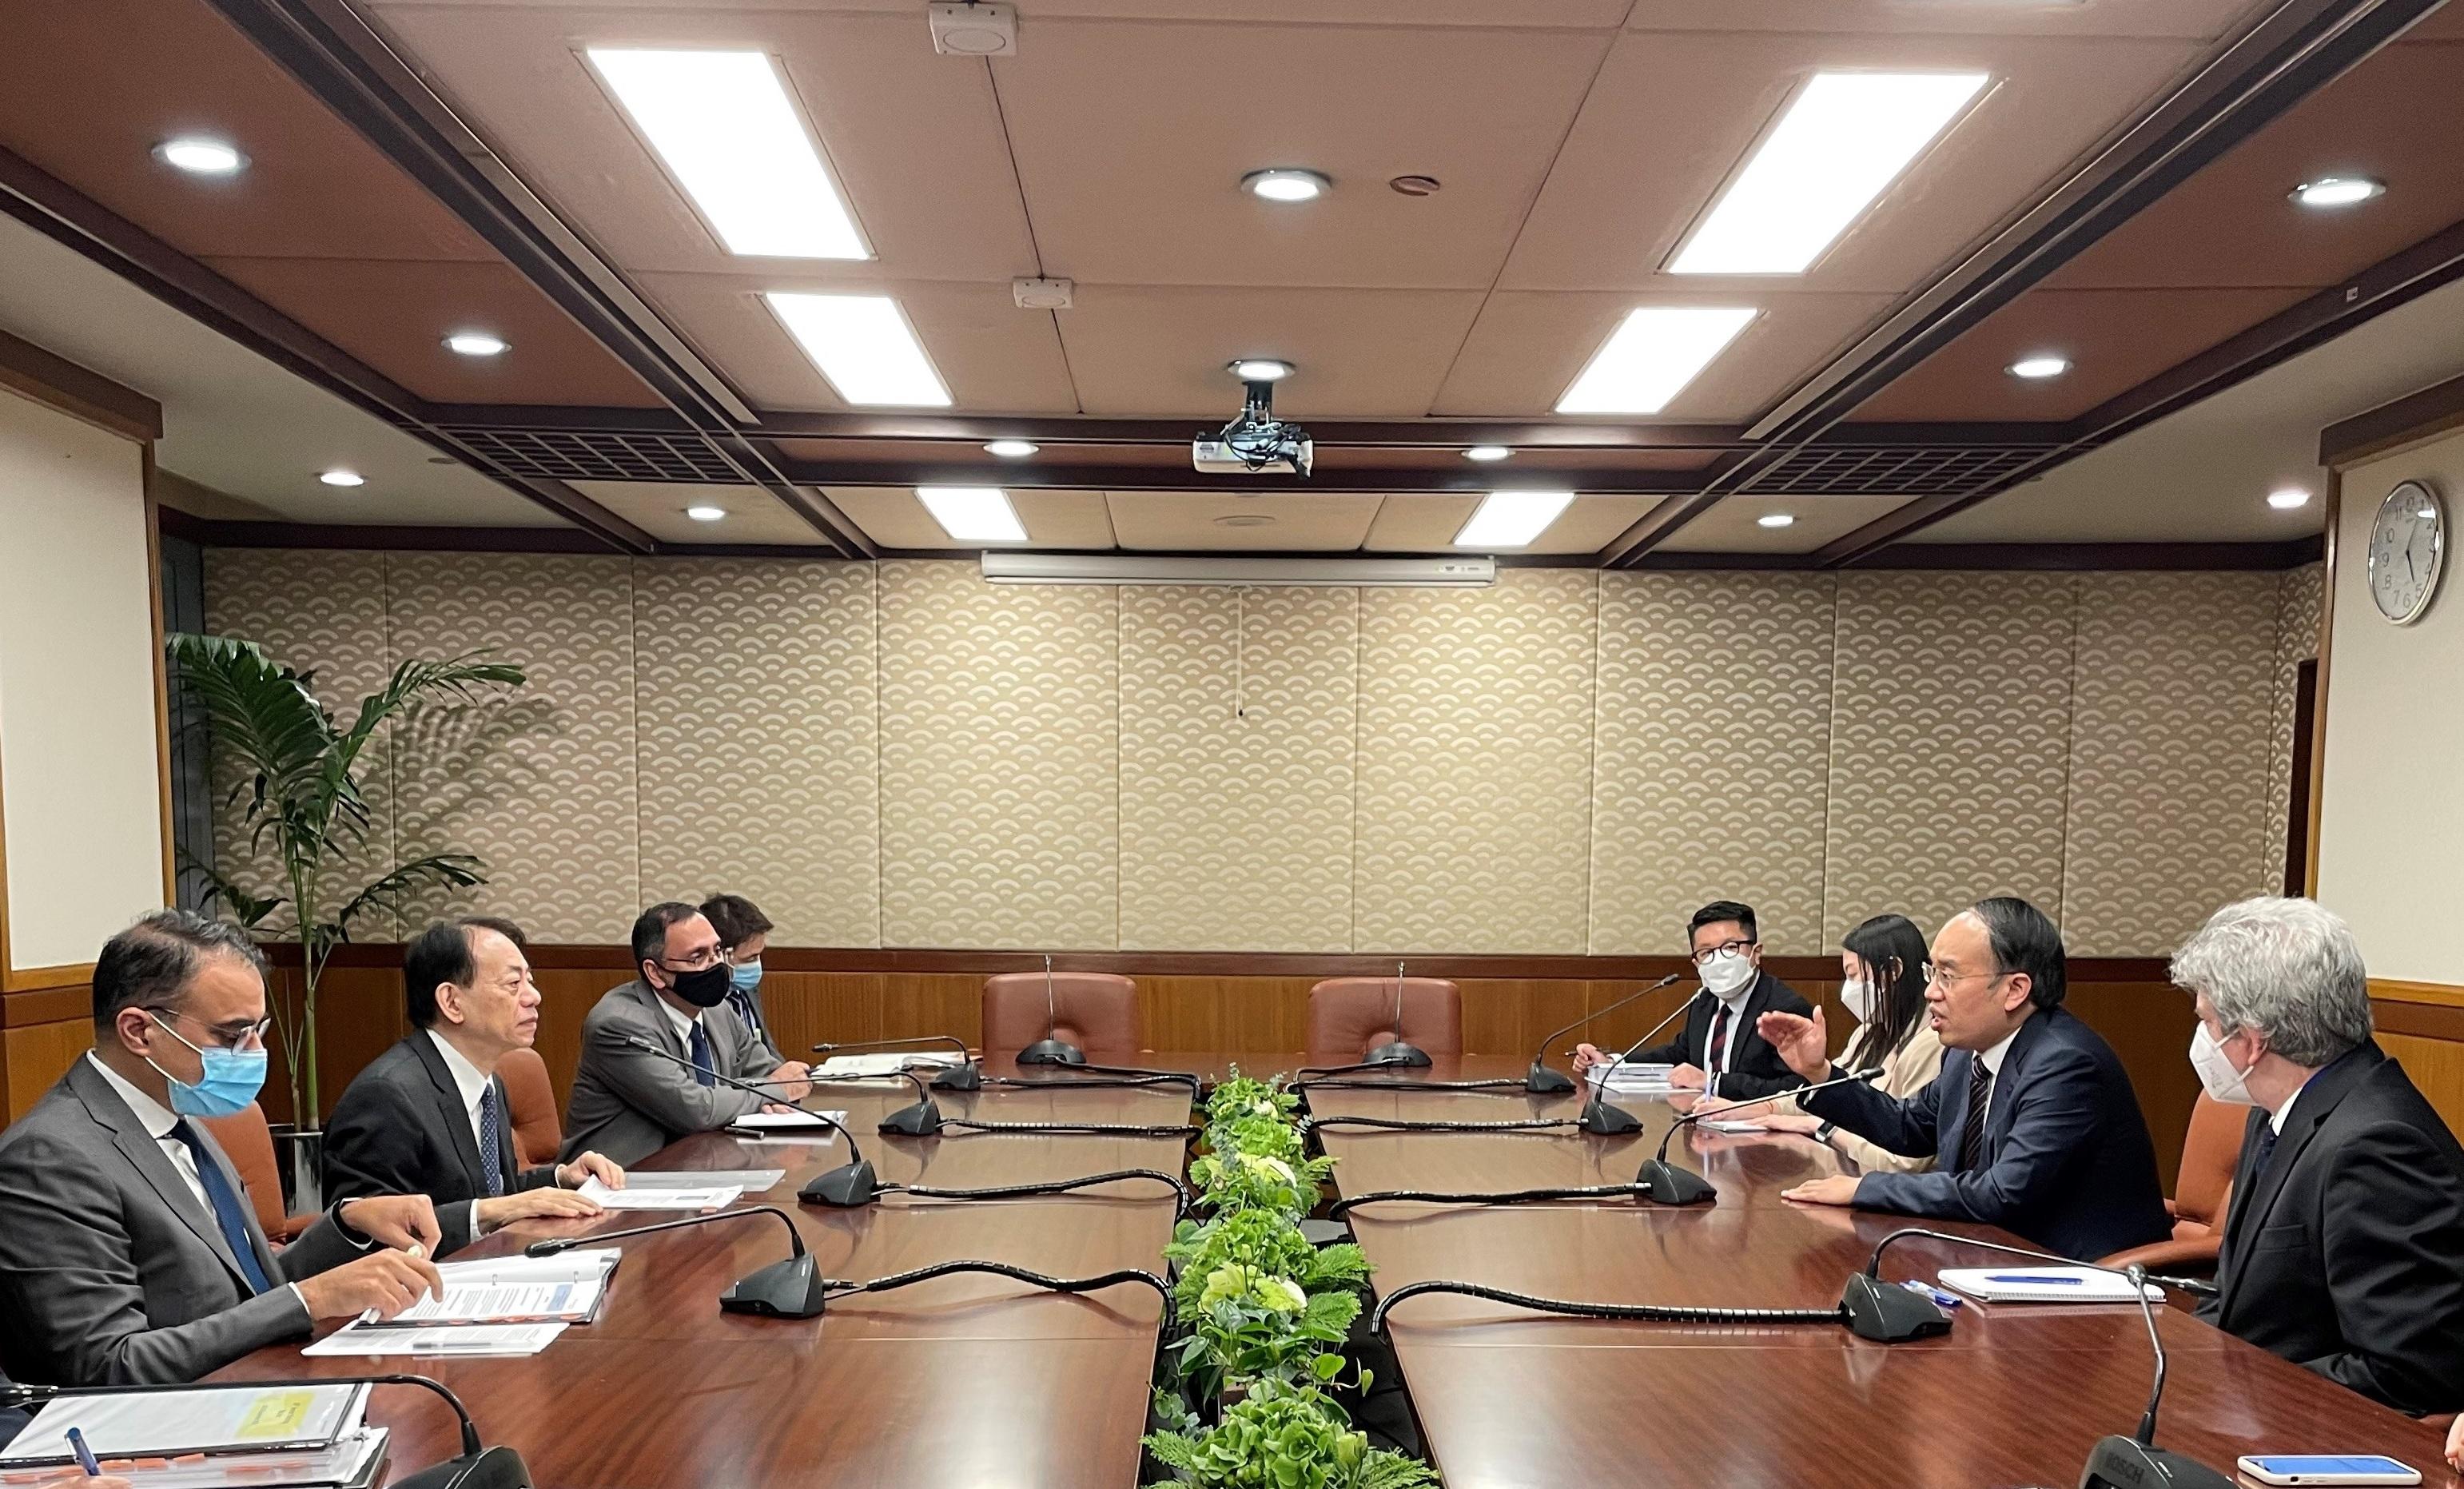 The Secretary for Financial Services and the Treasury, Mr Christopher Hui, today (September 26) started his visit to Manila, the Philippines. Photo shows Mr Hui (second right) meeting with the President of the Asian Development Bank, Mr Masatsugu Asakawa (second left) to discuss items of mutual interest.